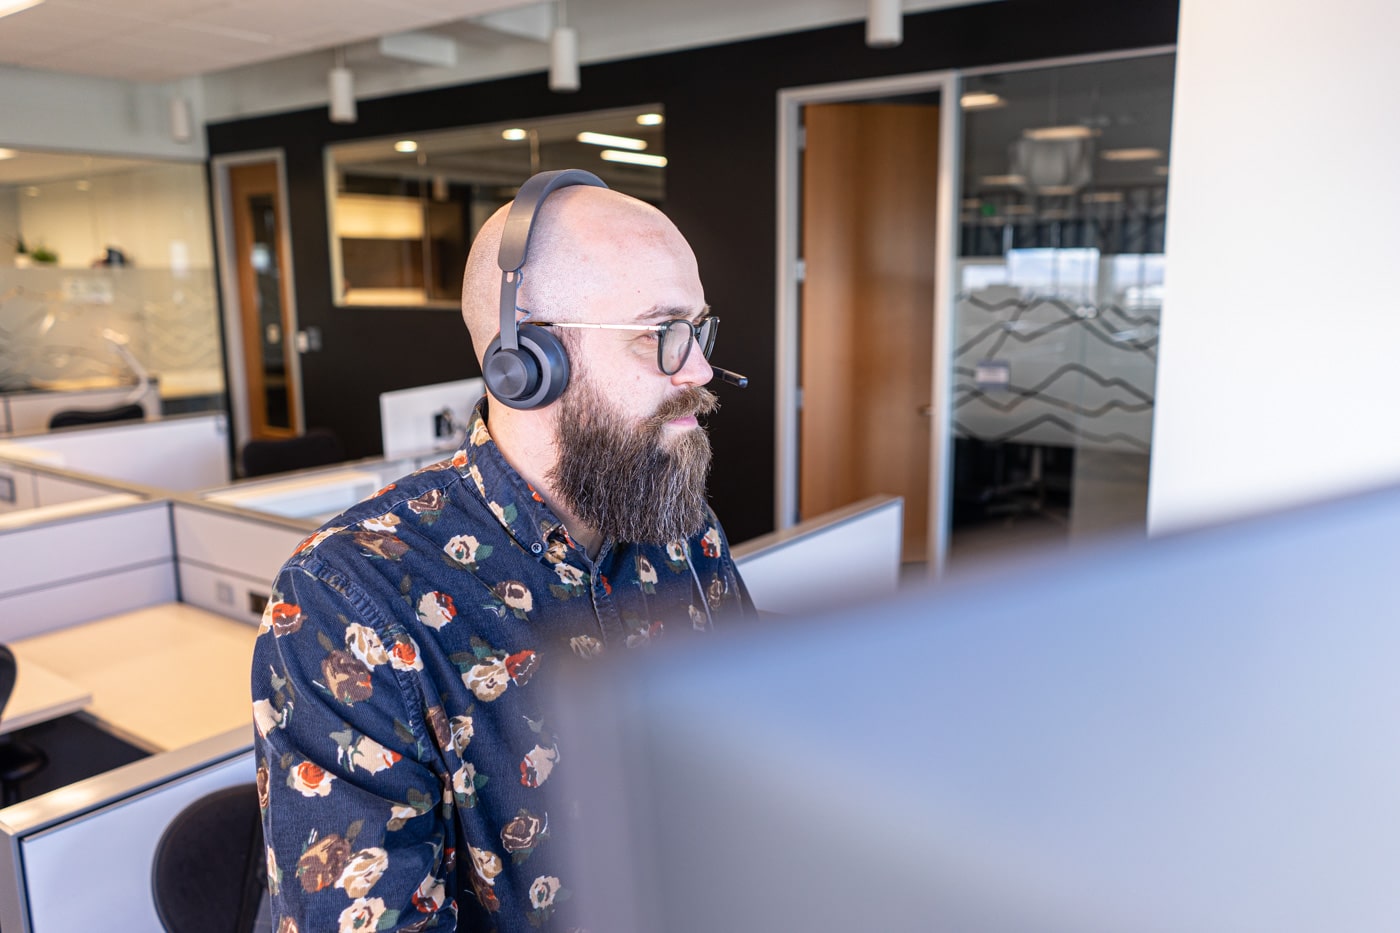 white bald man with a beard looking at a computer working with a headset on